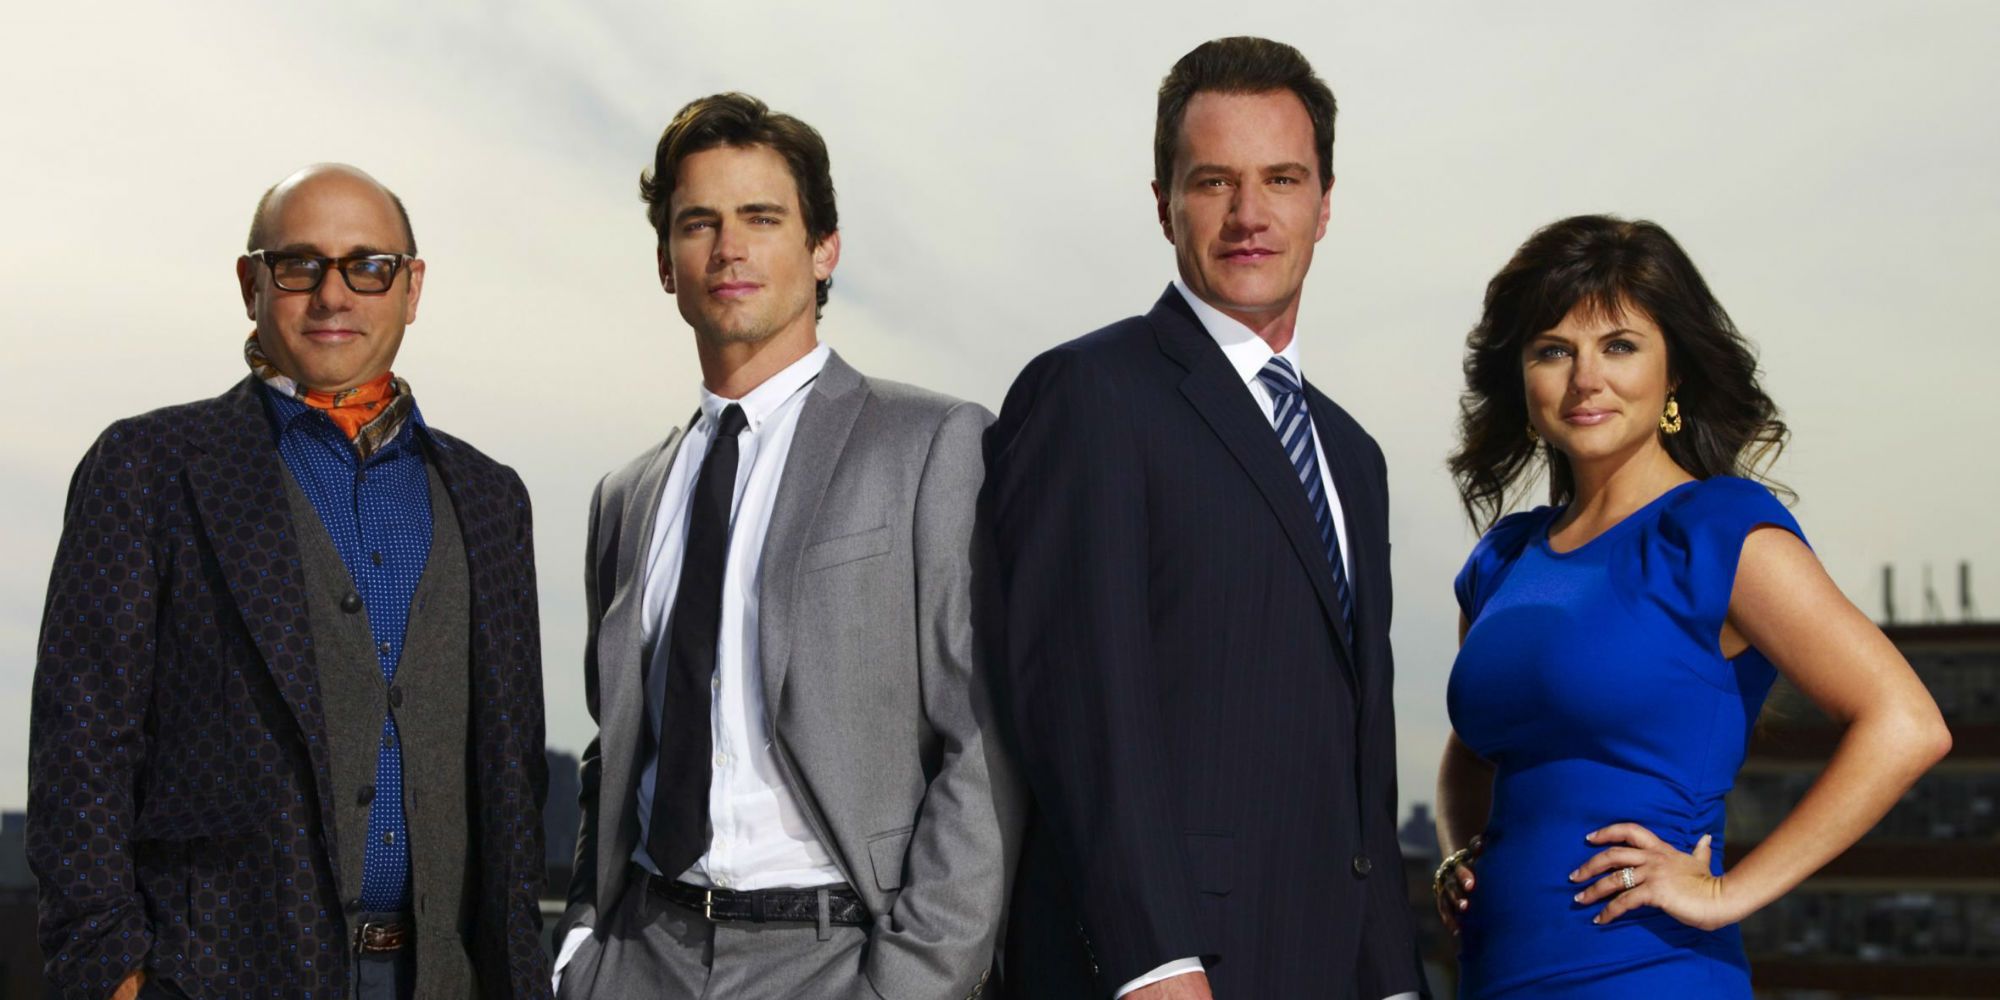 The four leads of White Collar